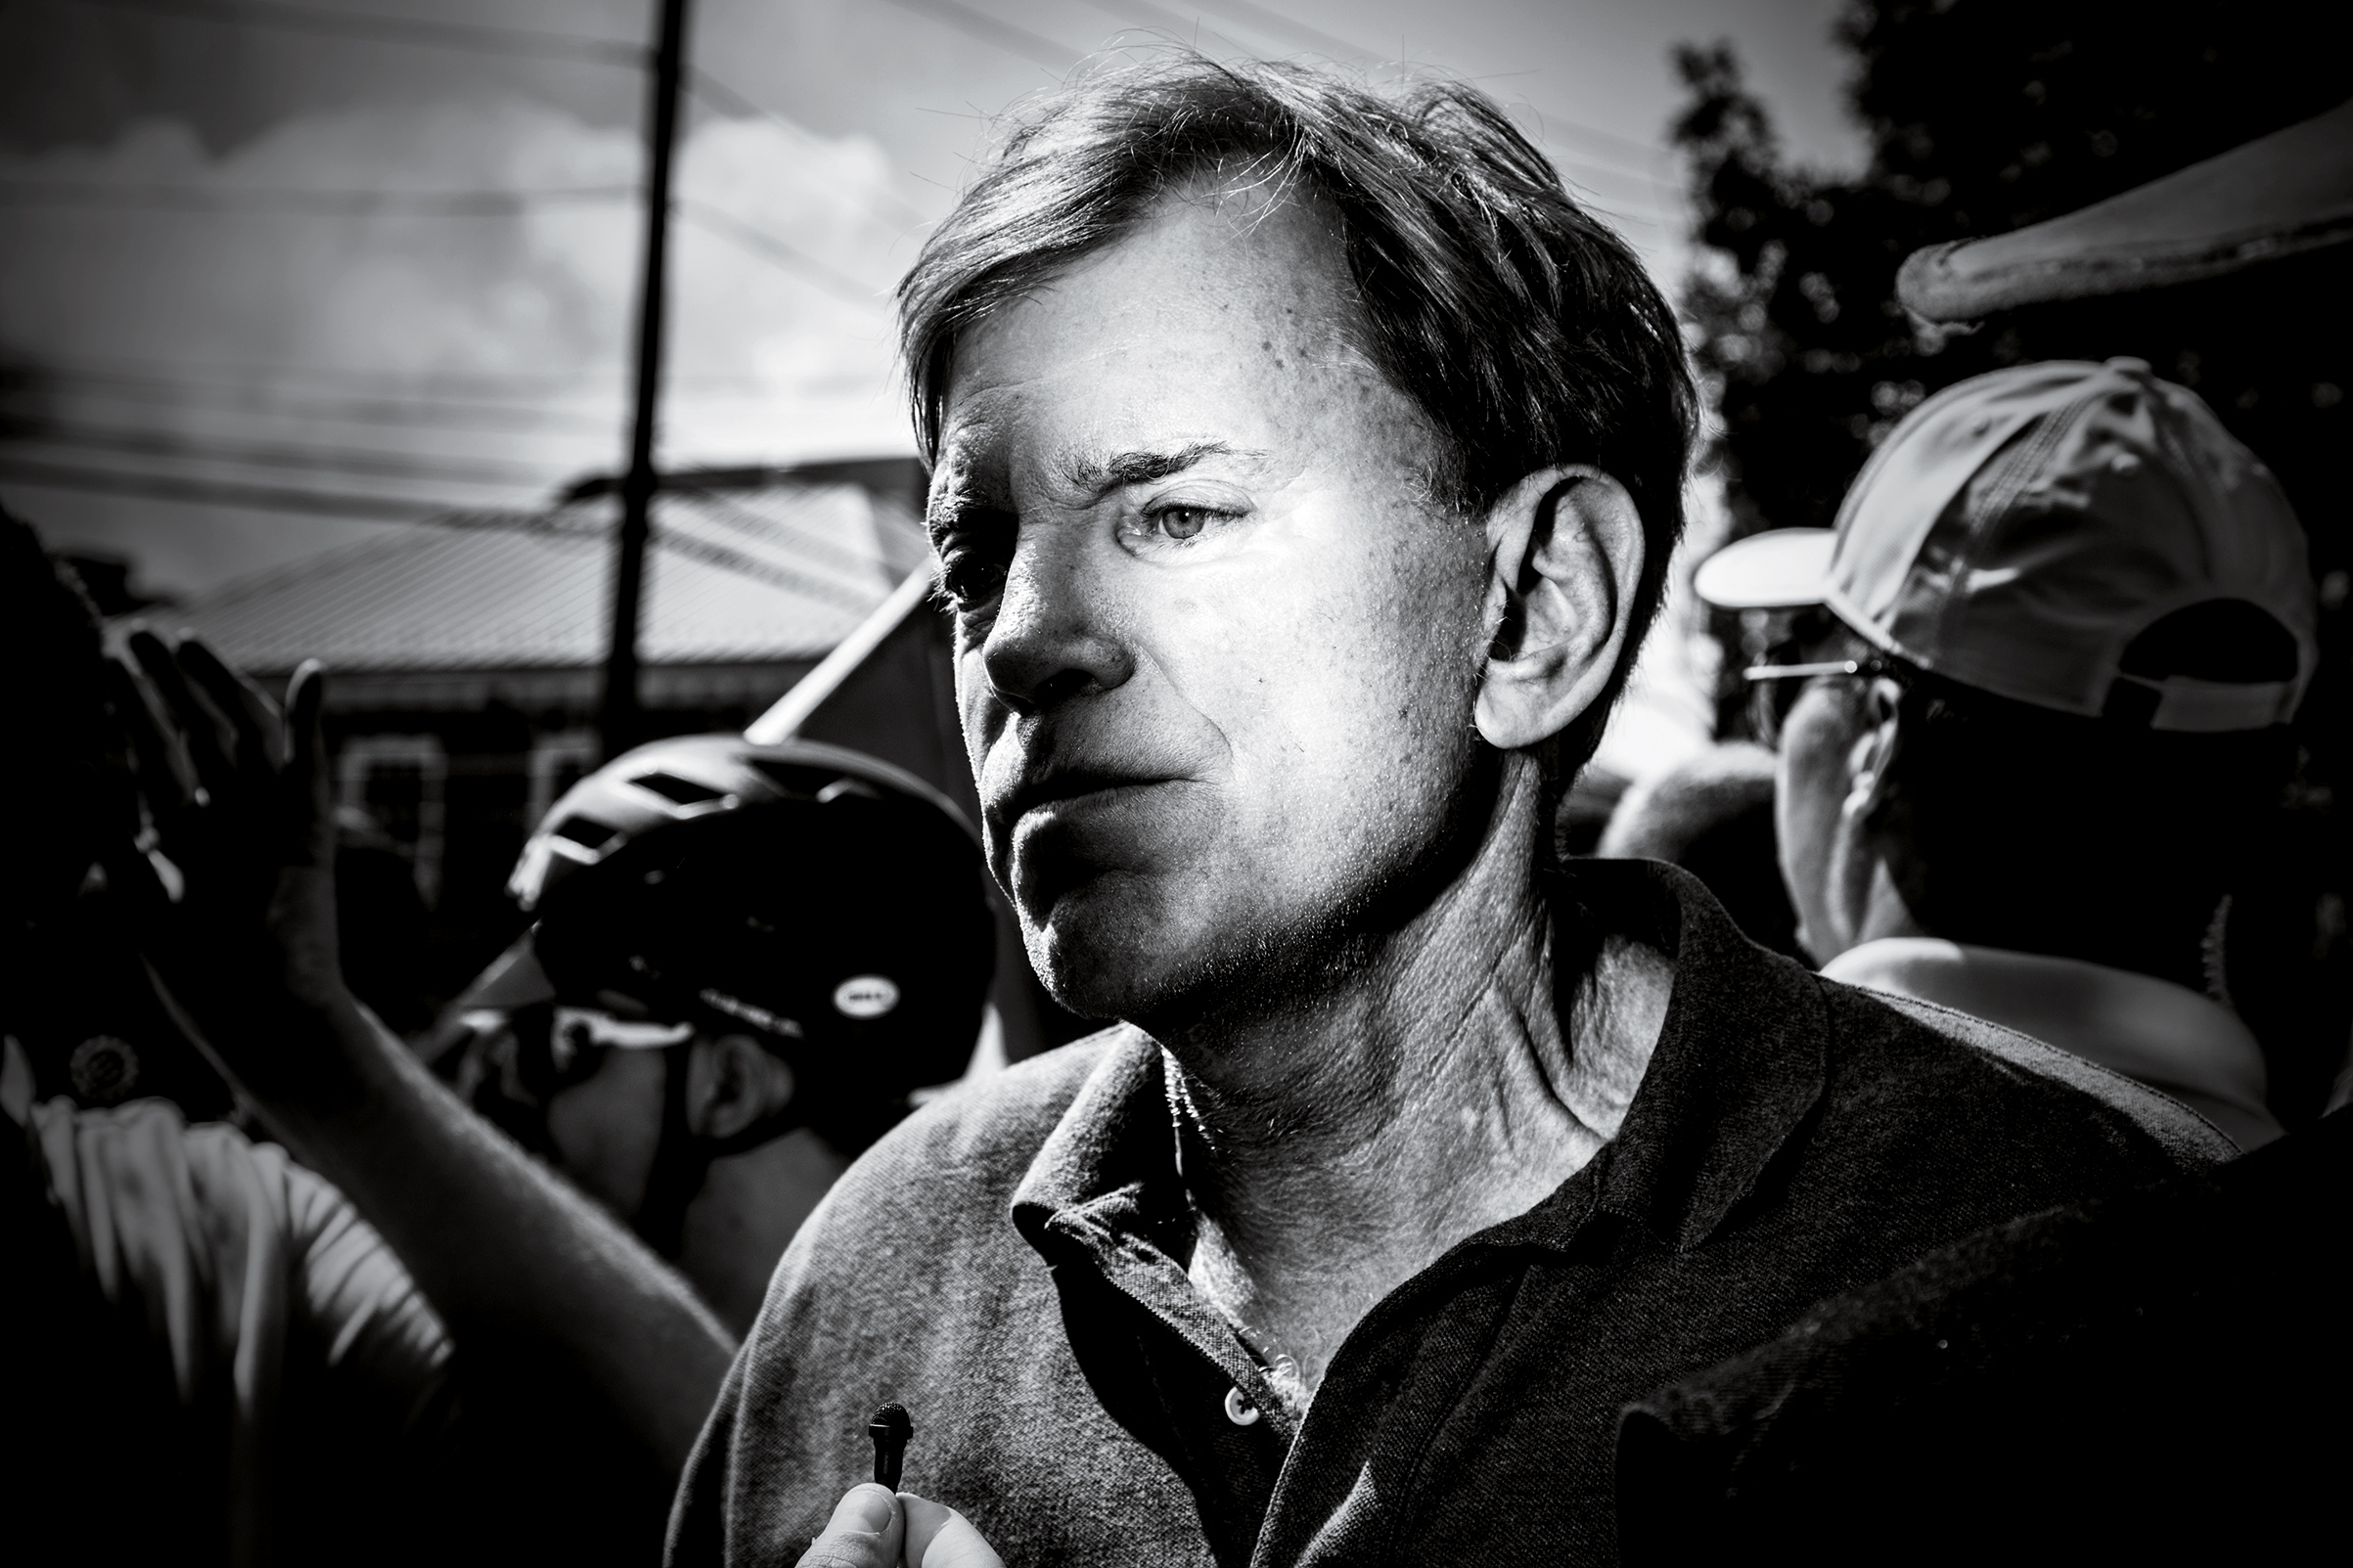 David Duke, the white nationalist and former KKK Grand Wizard, at the Unite the Right rally on Aug. 12 (Mark Peterson—Redux)